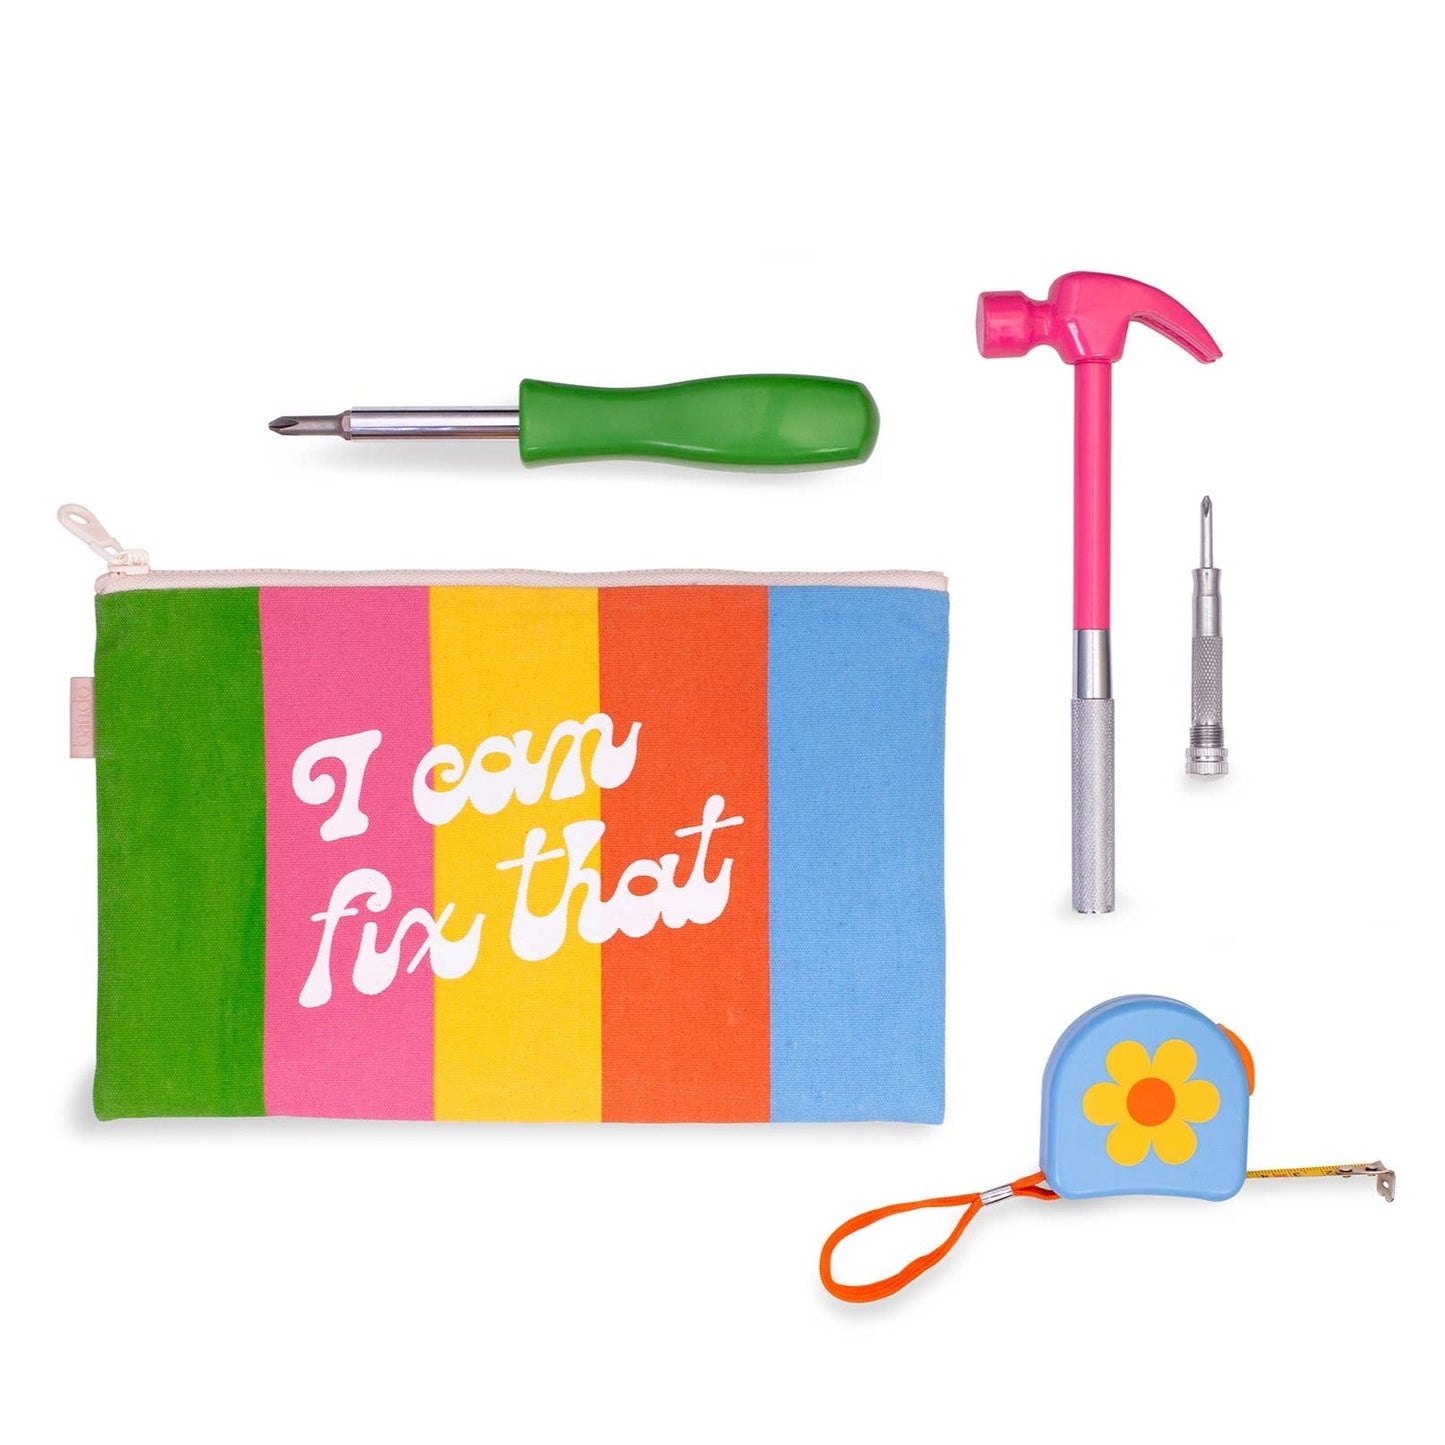 I Can Fix That Tool Bag Starburst in Rainbow Colors Canvas Pouch | Basic Mini Tool Kit